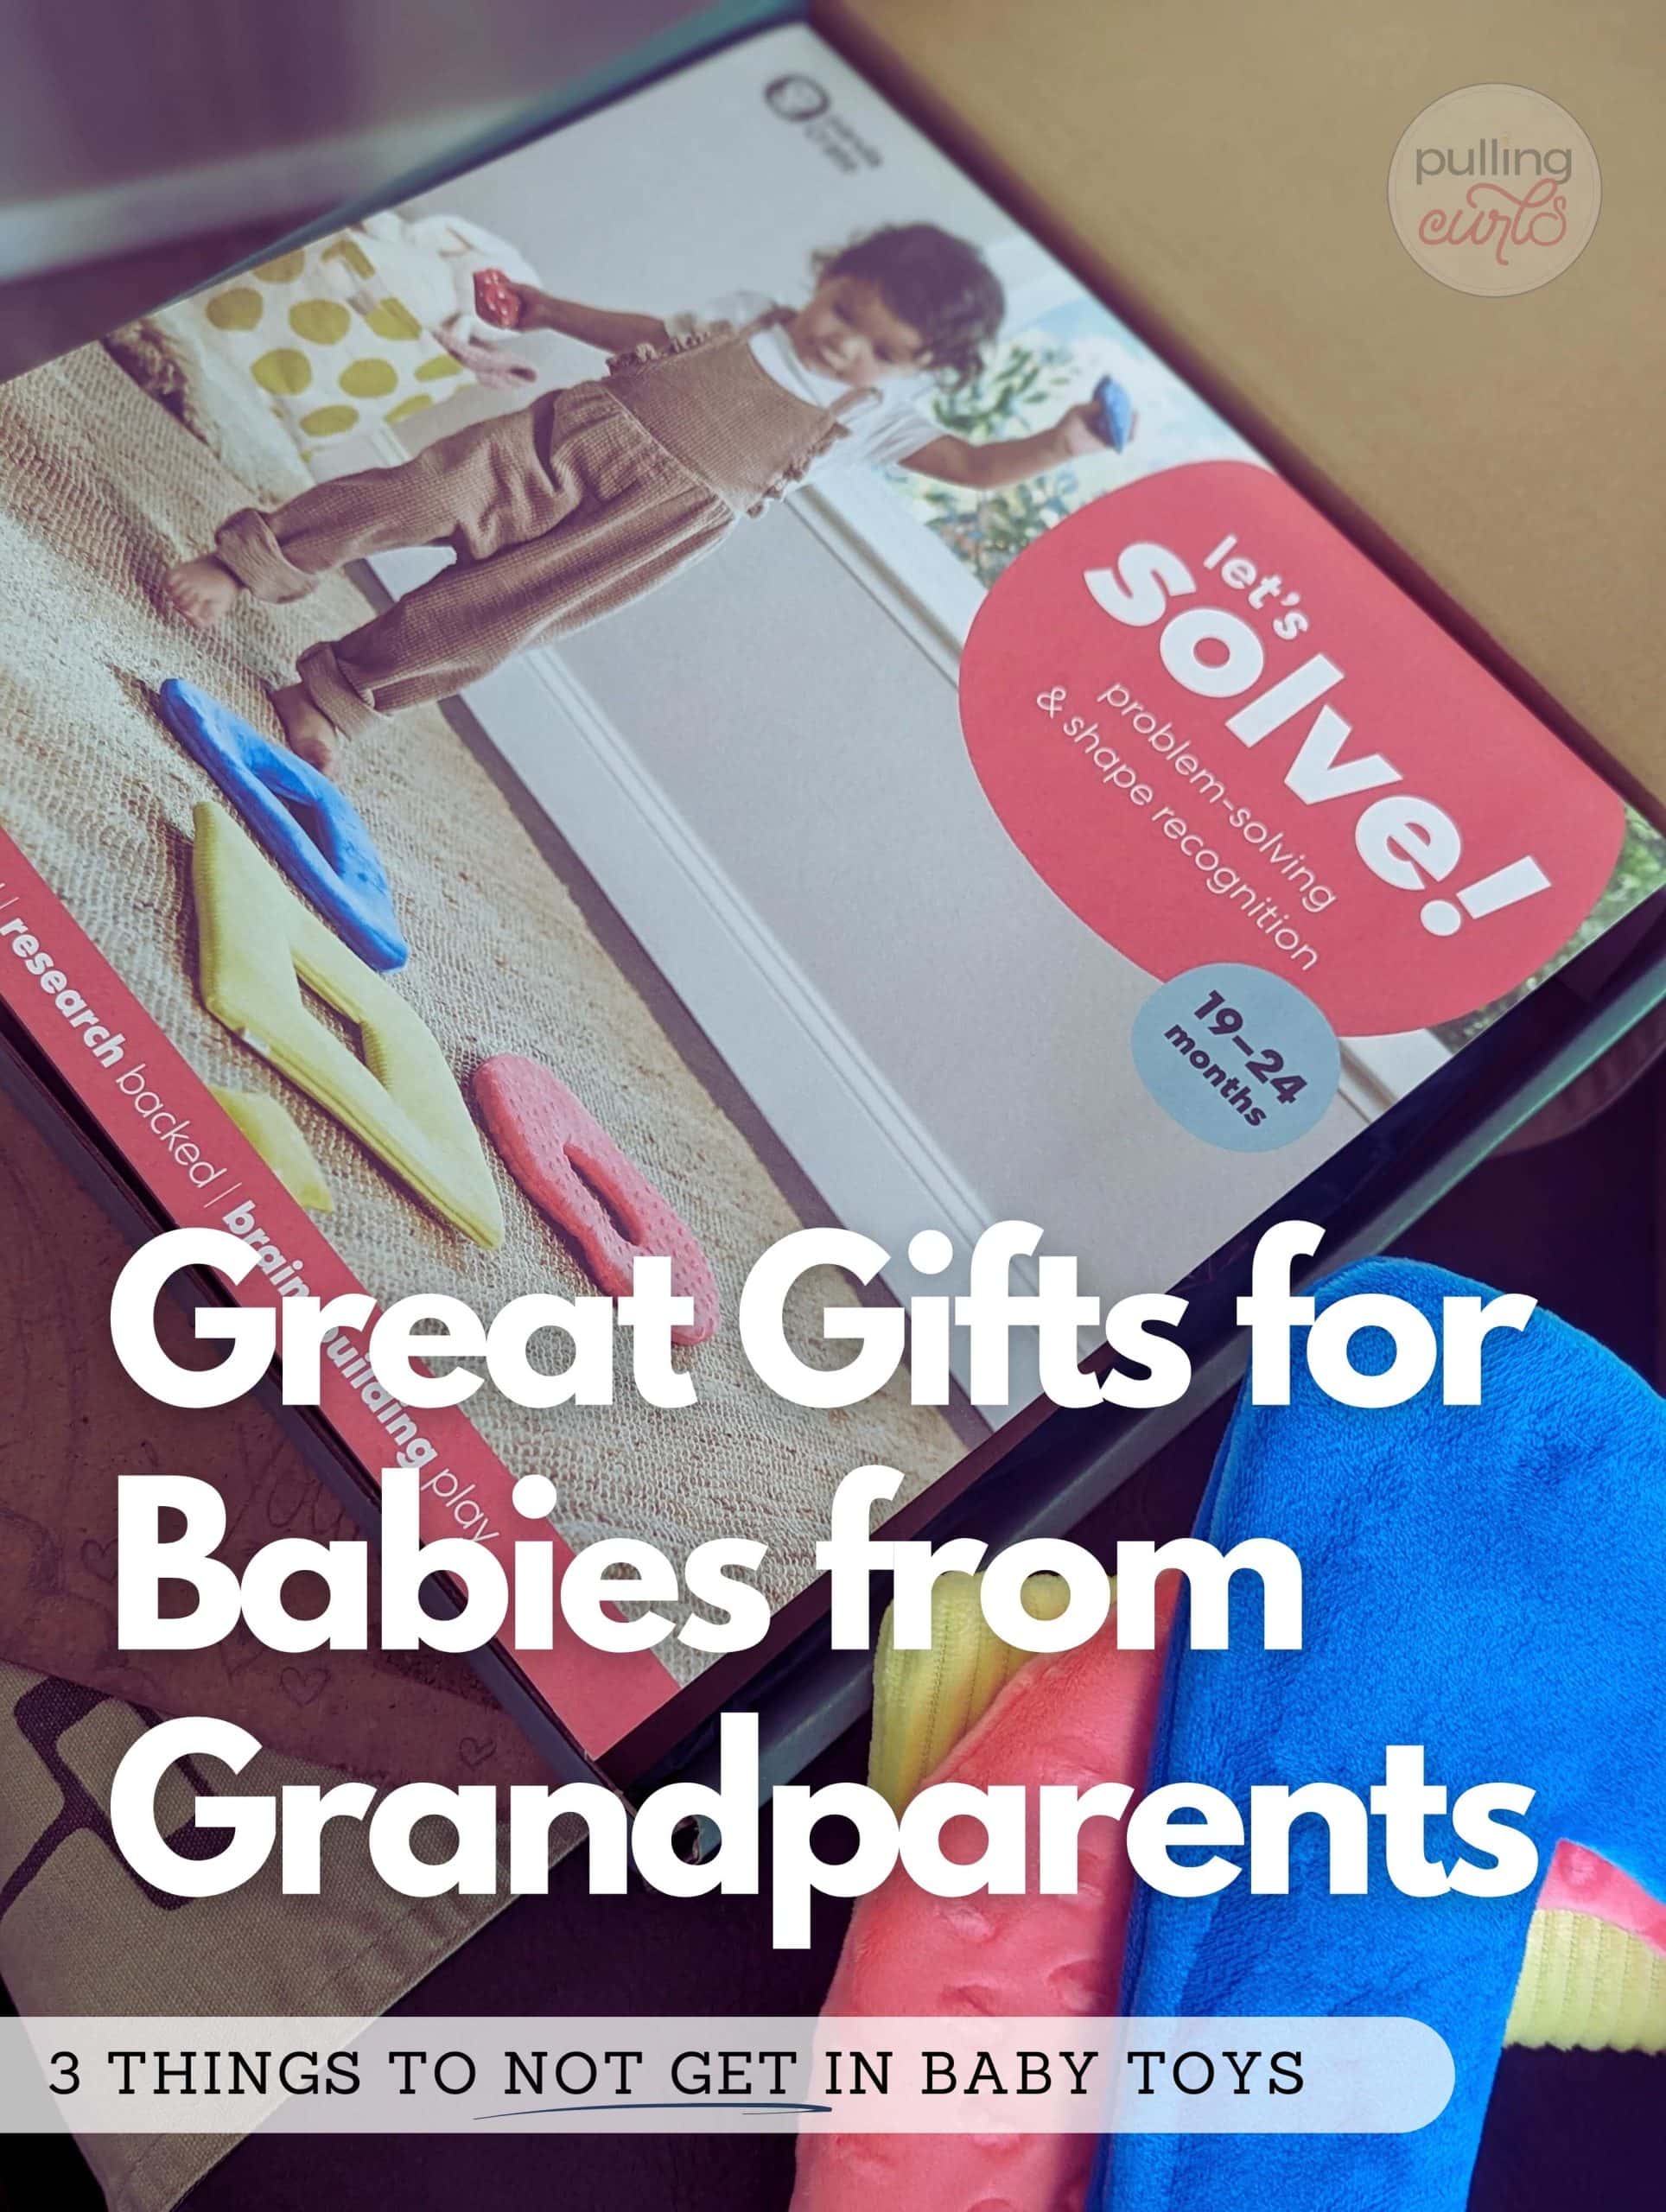 Discover the ultimate baby gift from doting grandparents online! Our handpicked selection ensures the precious bundle of joy receives a memorable keepsake. From personalized storybooks to heirloom-quality toys, it only takes a click to spread grandparental love. A gift from the heart, cherished now and forever! via @pullingcurls